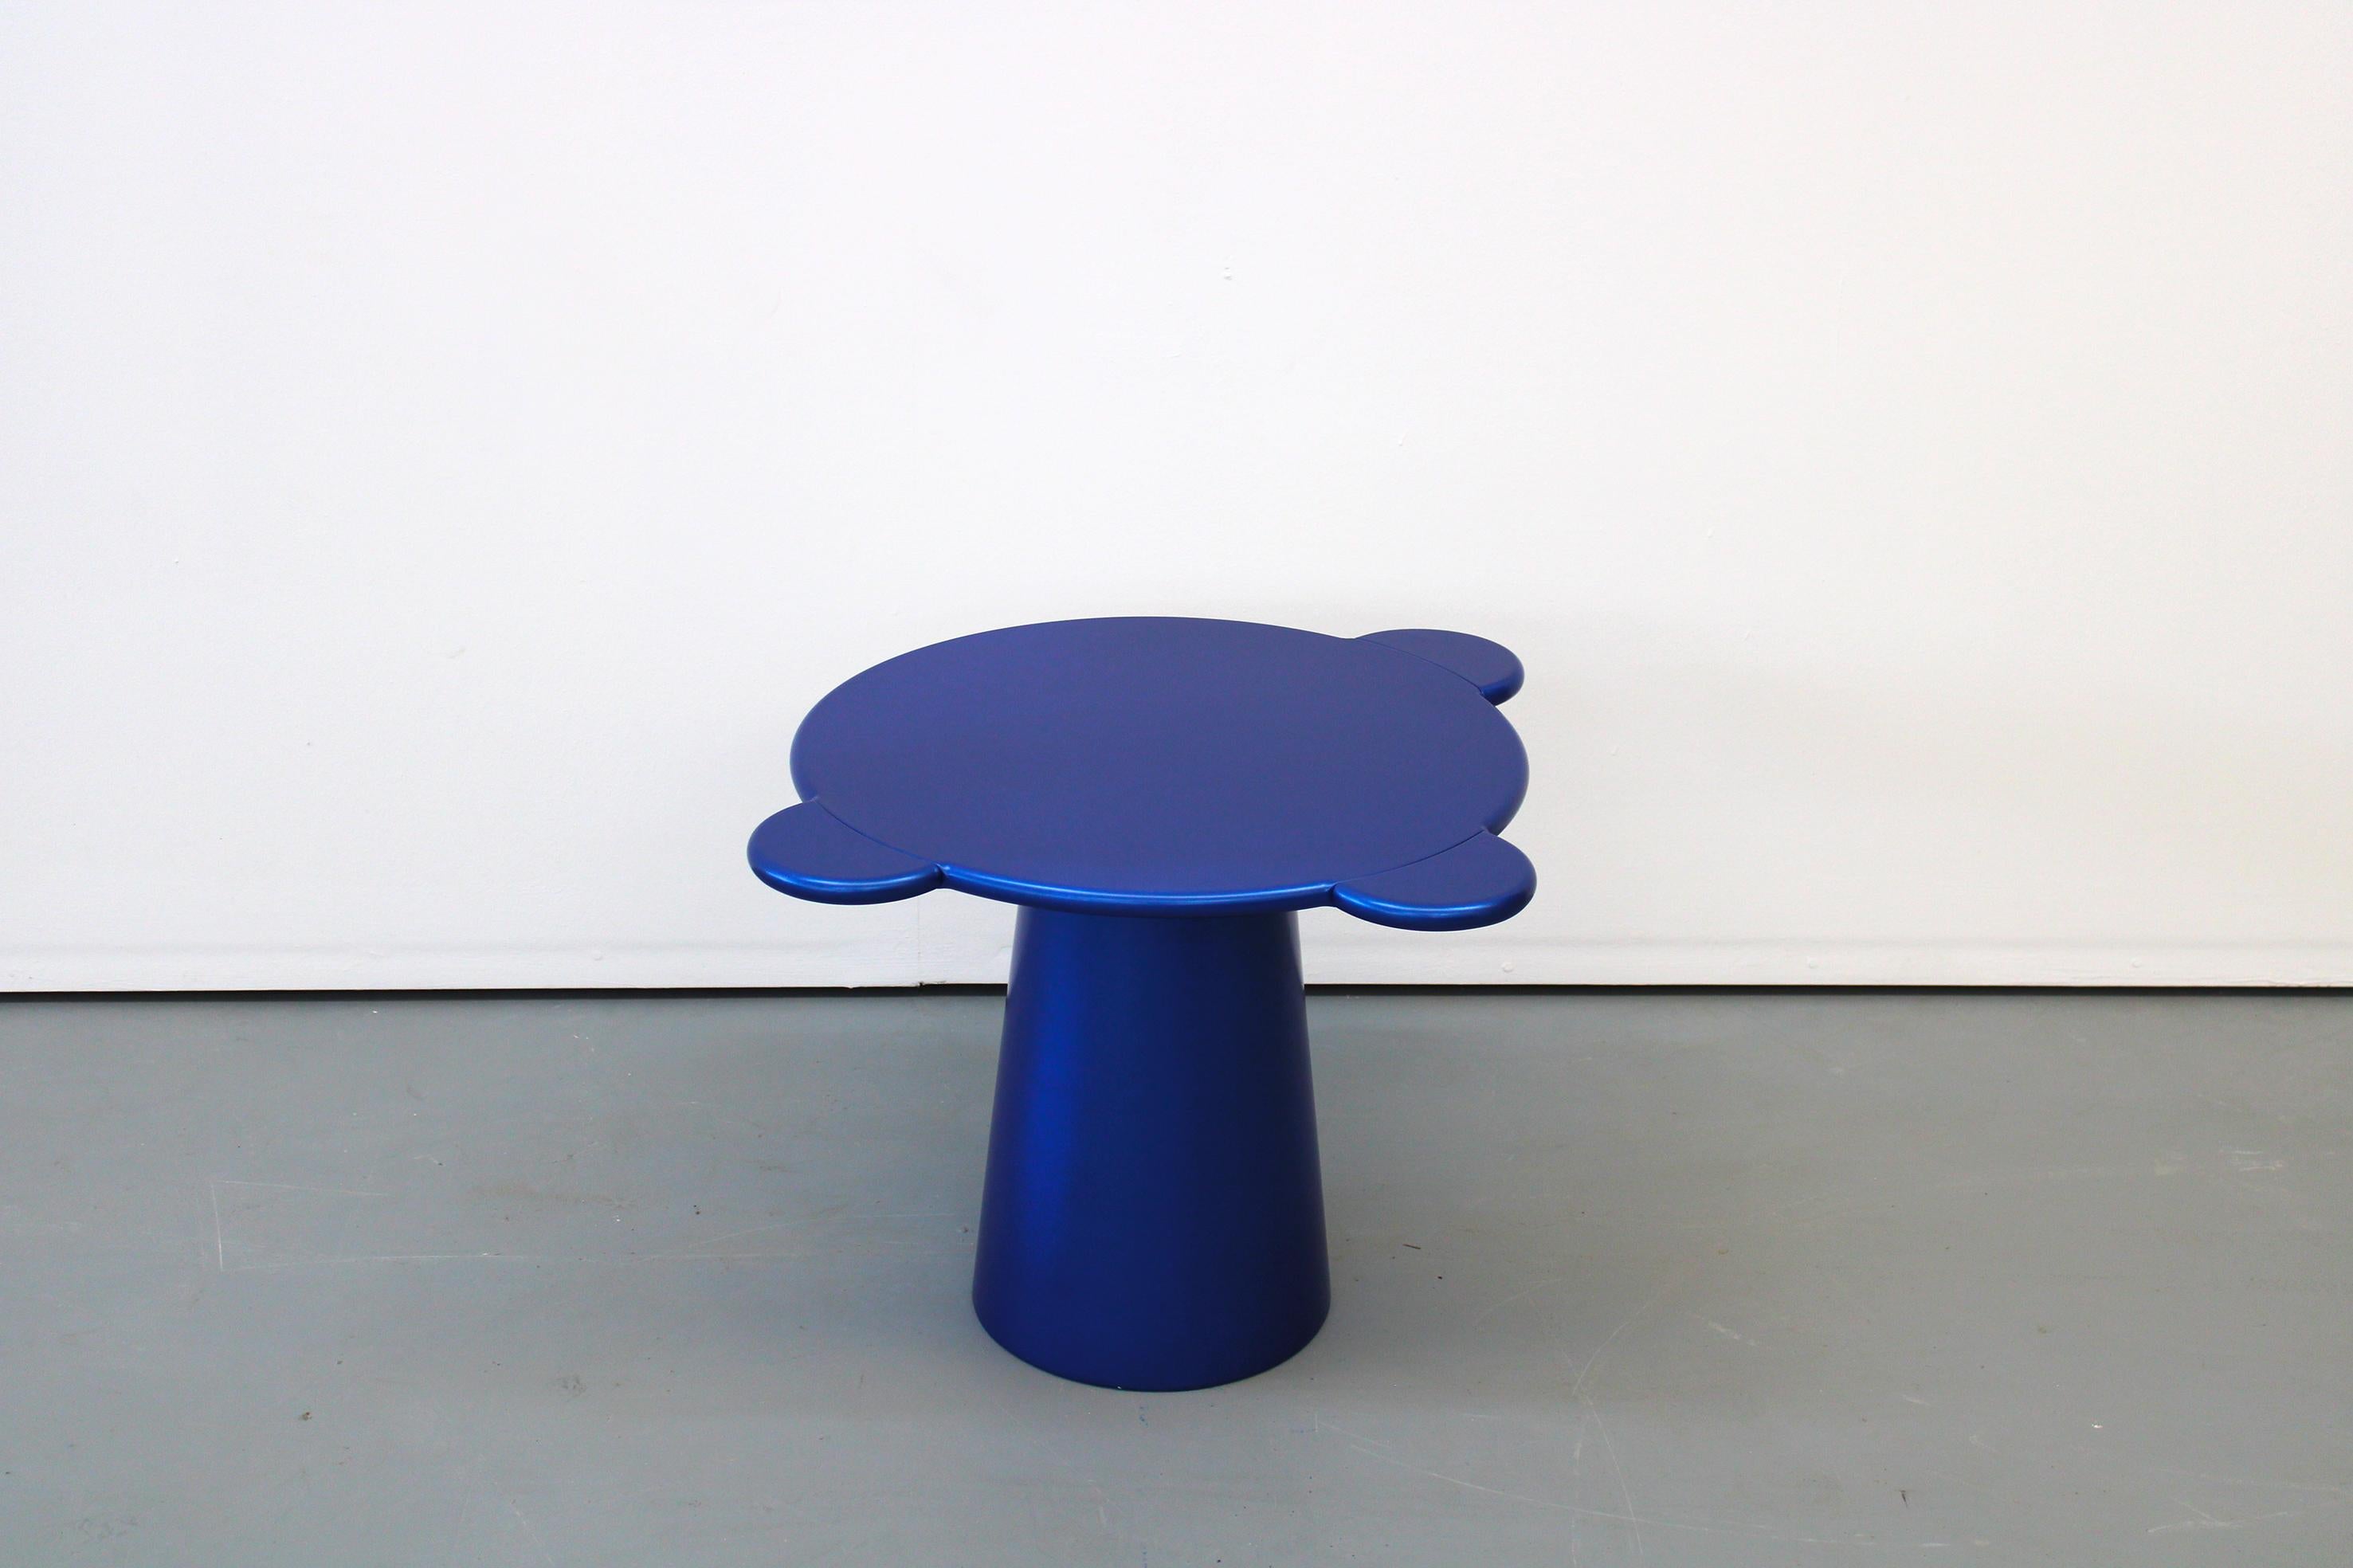 Donald coffee table has a sculptural and a cosmic aspect with colorful and circular shapes. Donald slots into the real space by interacting colors and shapes in an astral dimension. Its name is a tribute to the visual artist Donald Judd for his